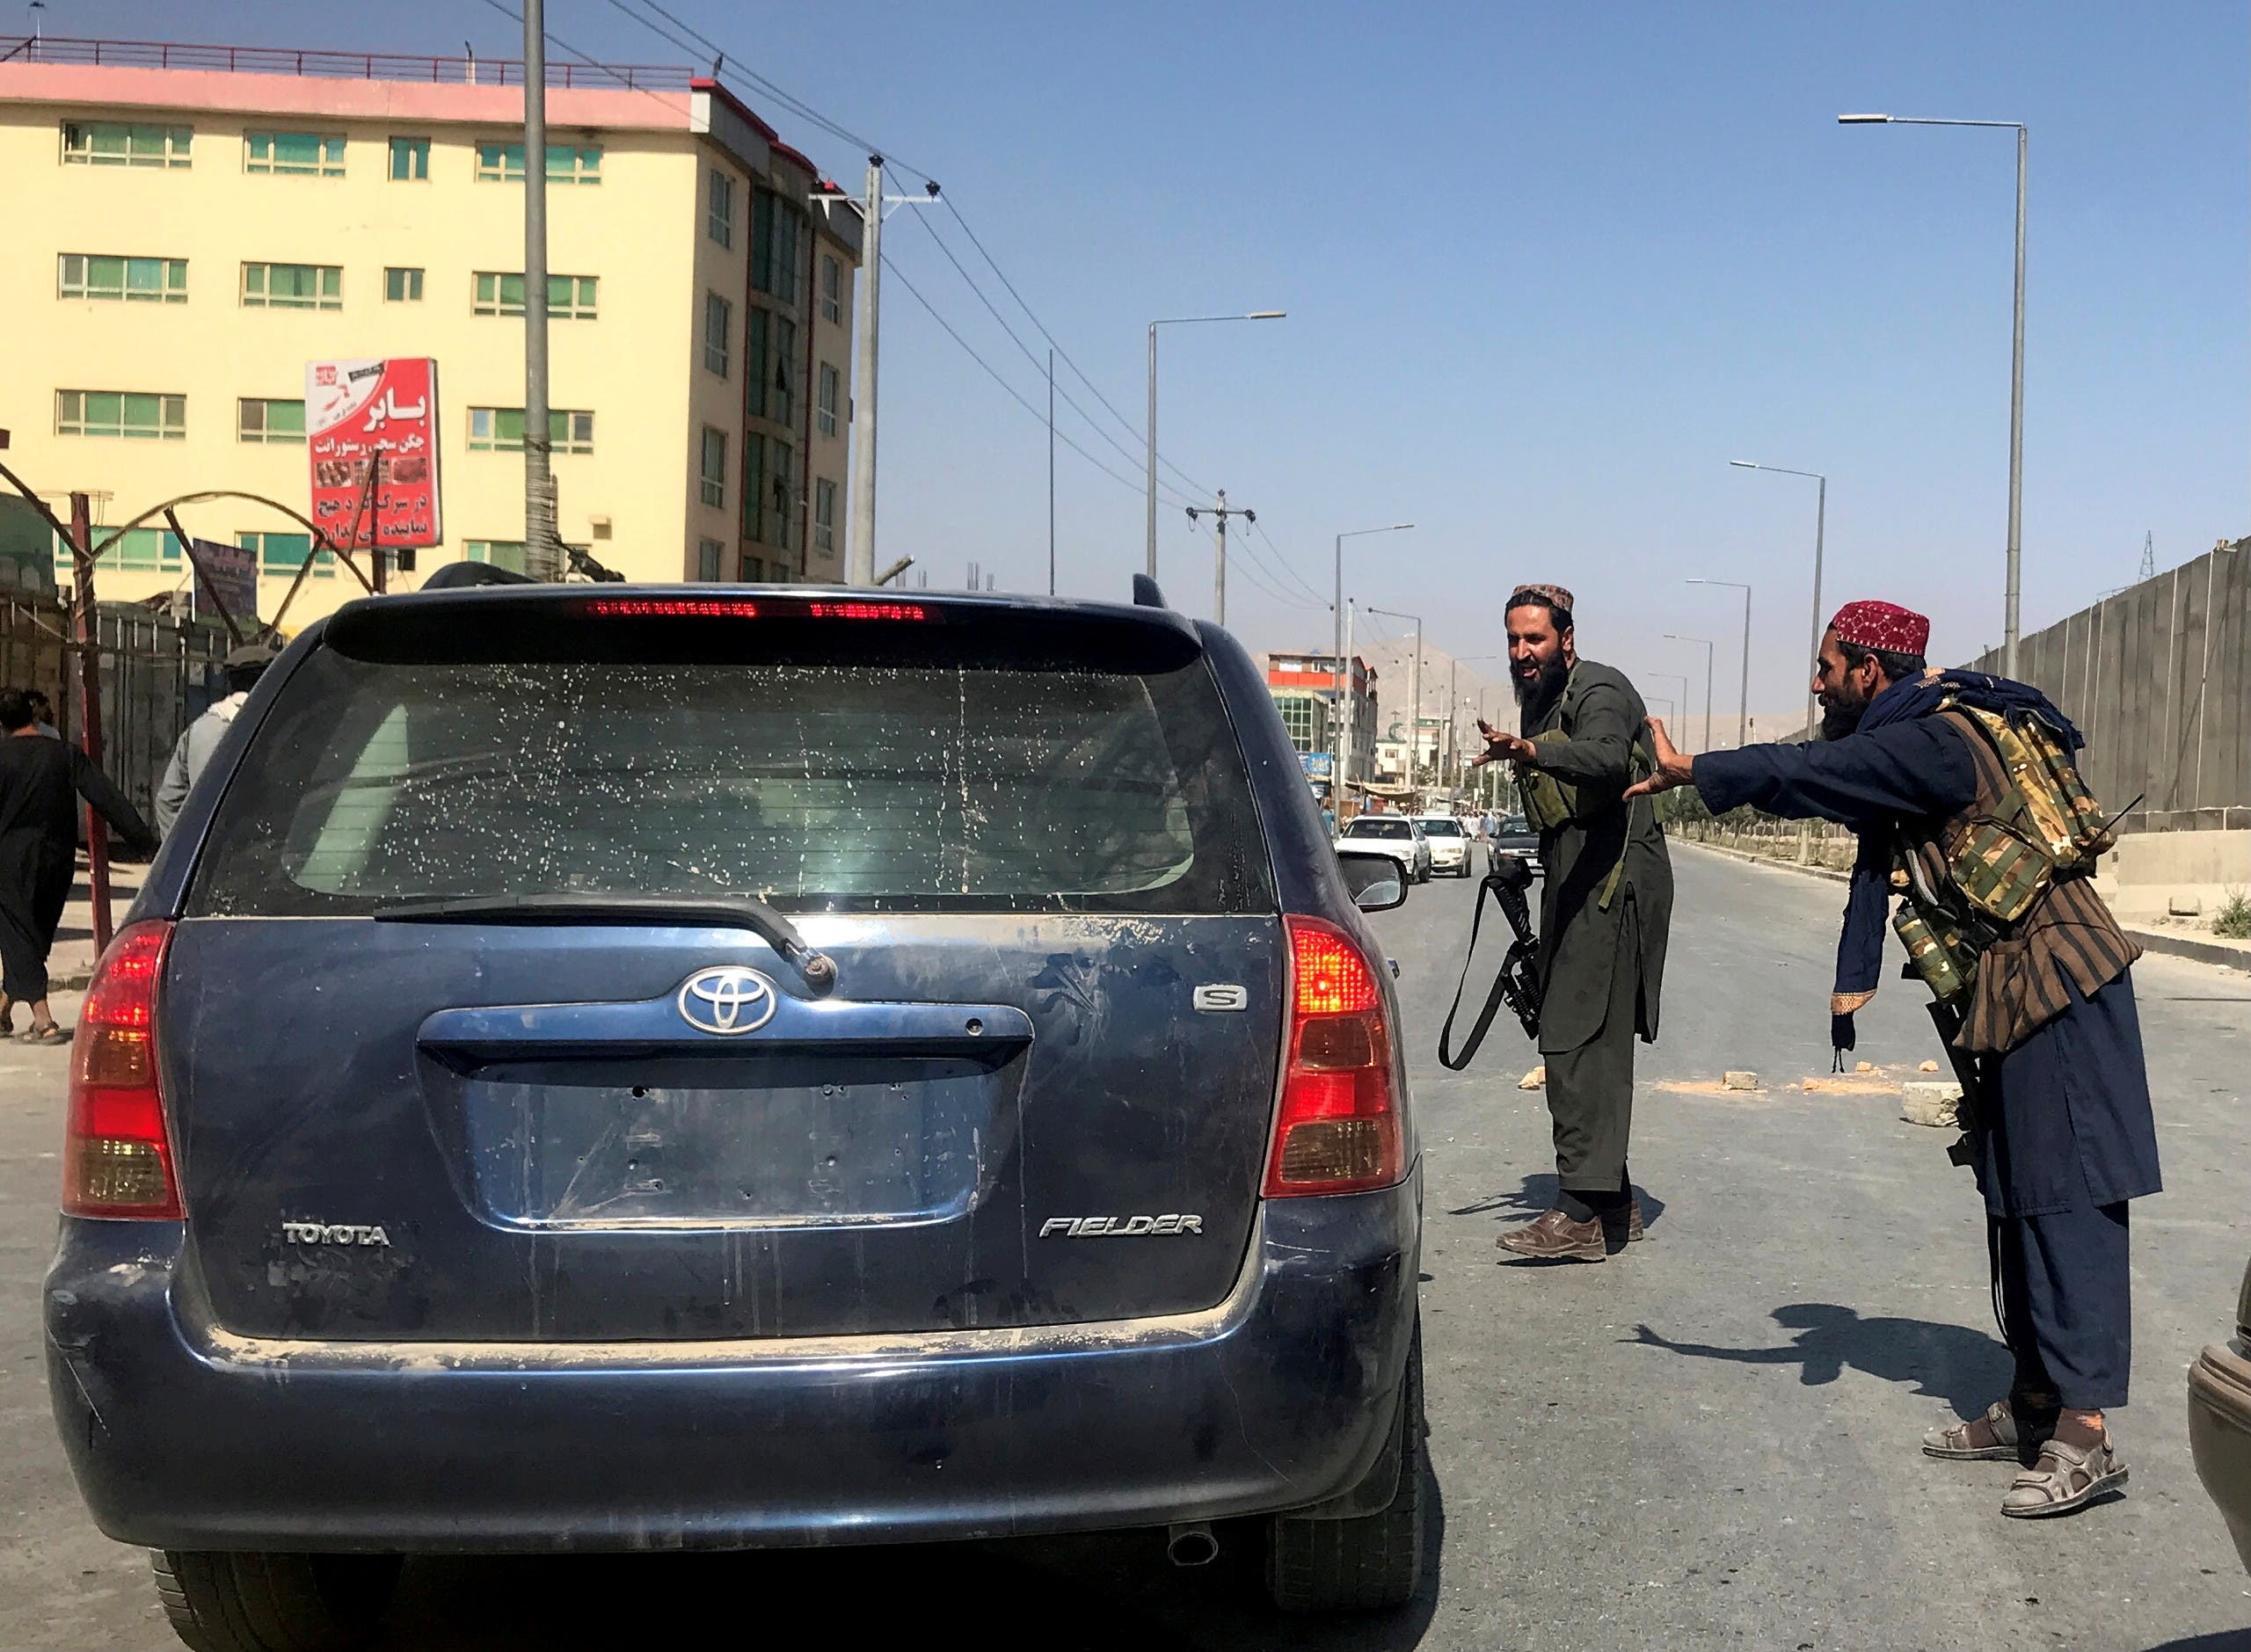 FILE PHOTO: Members of Taliban forces gesture as they check a vehicle on a street in Kabul, Afghanistan, August 16, 2021. (Reuters)